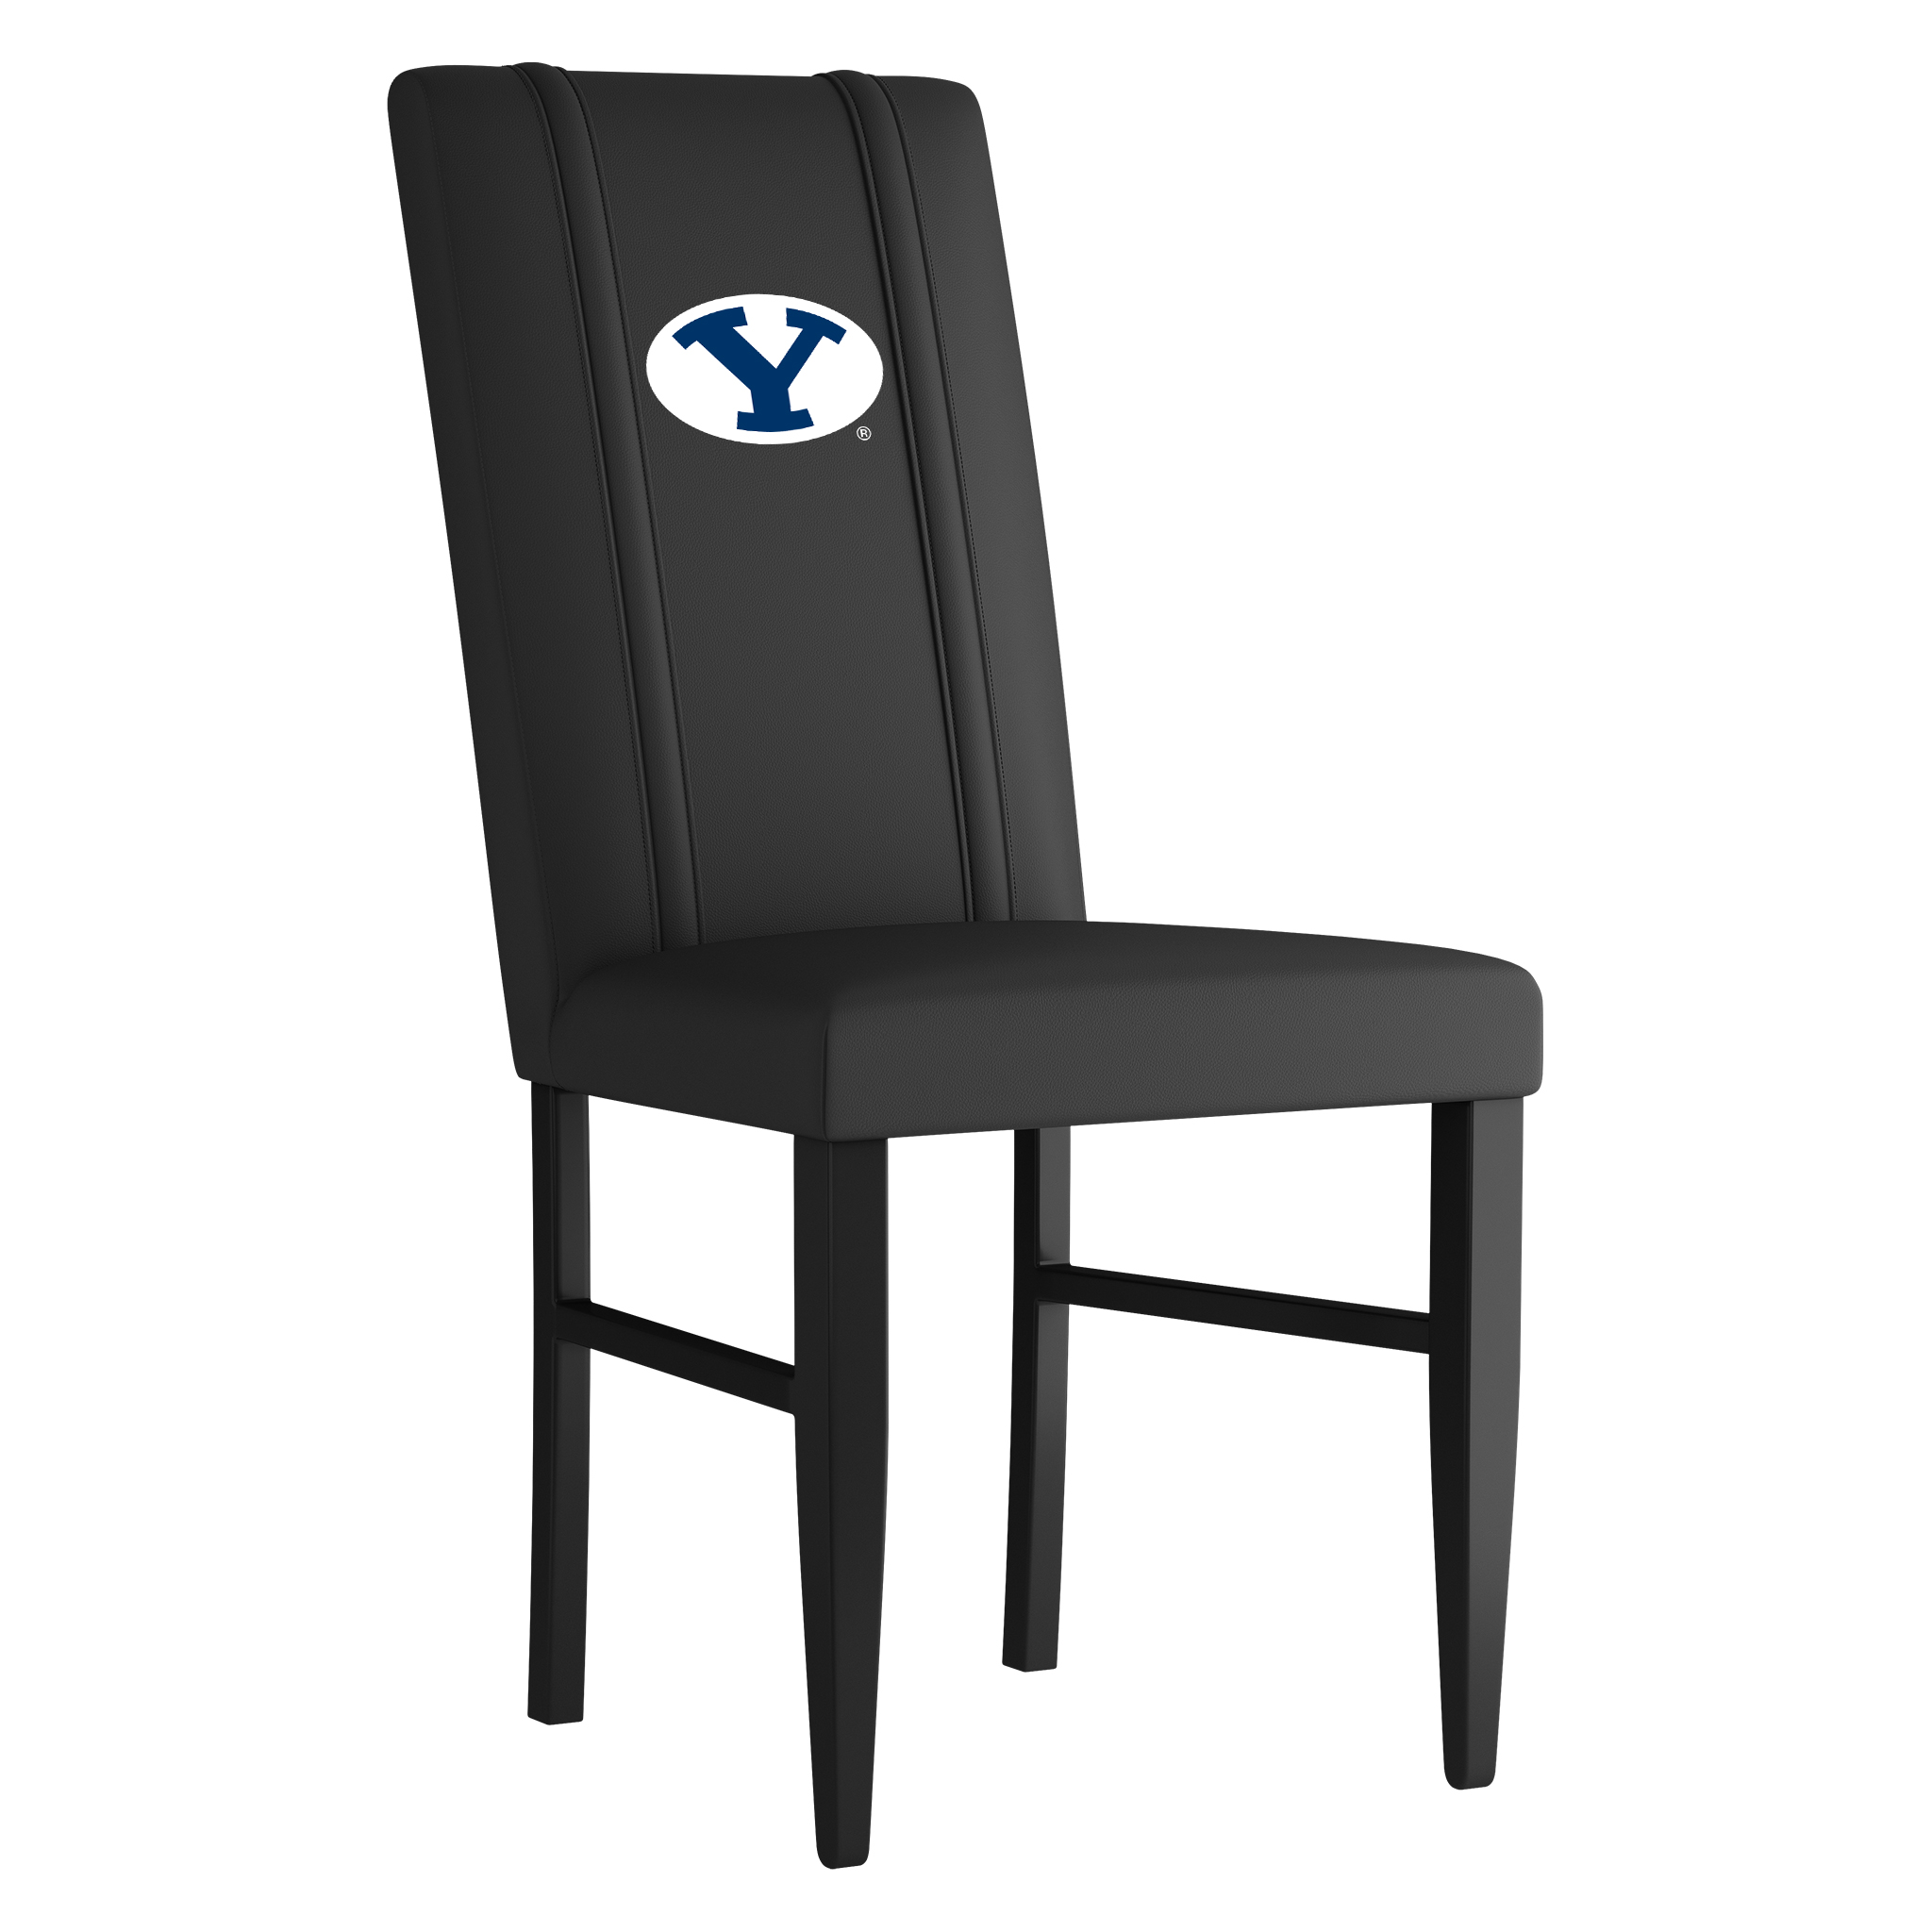 Byu Cougars Side Chair 2000 With Byu Cougars Logo